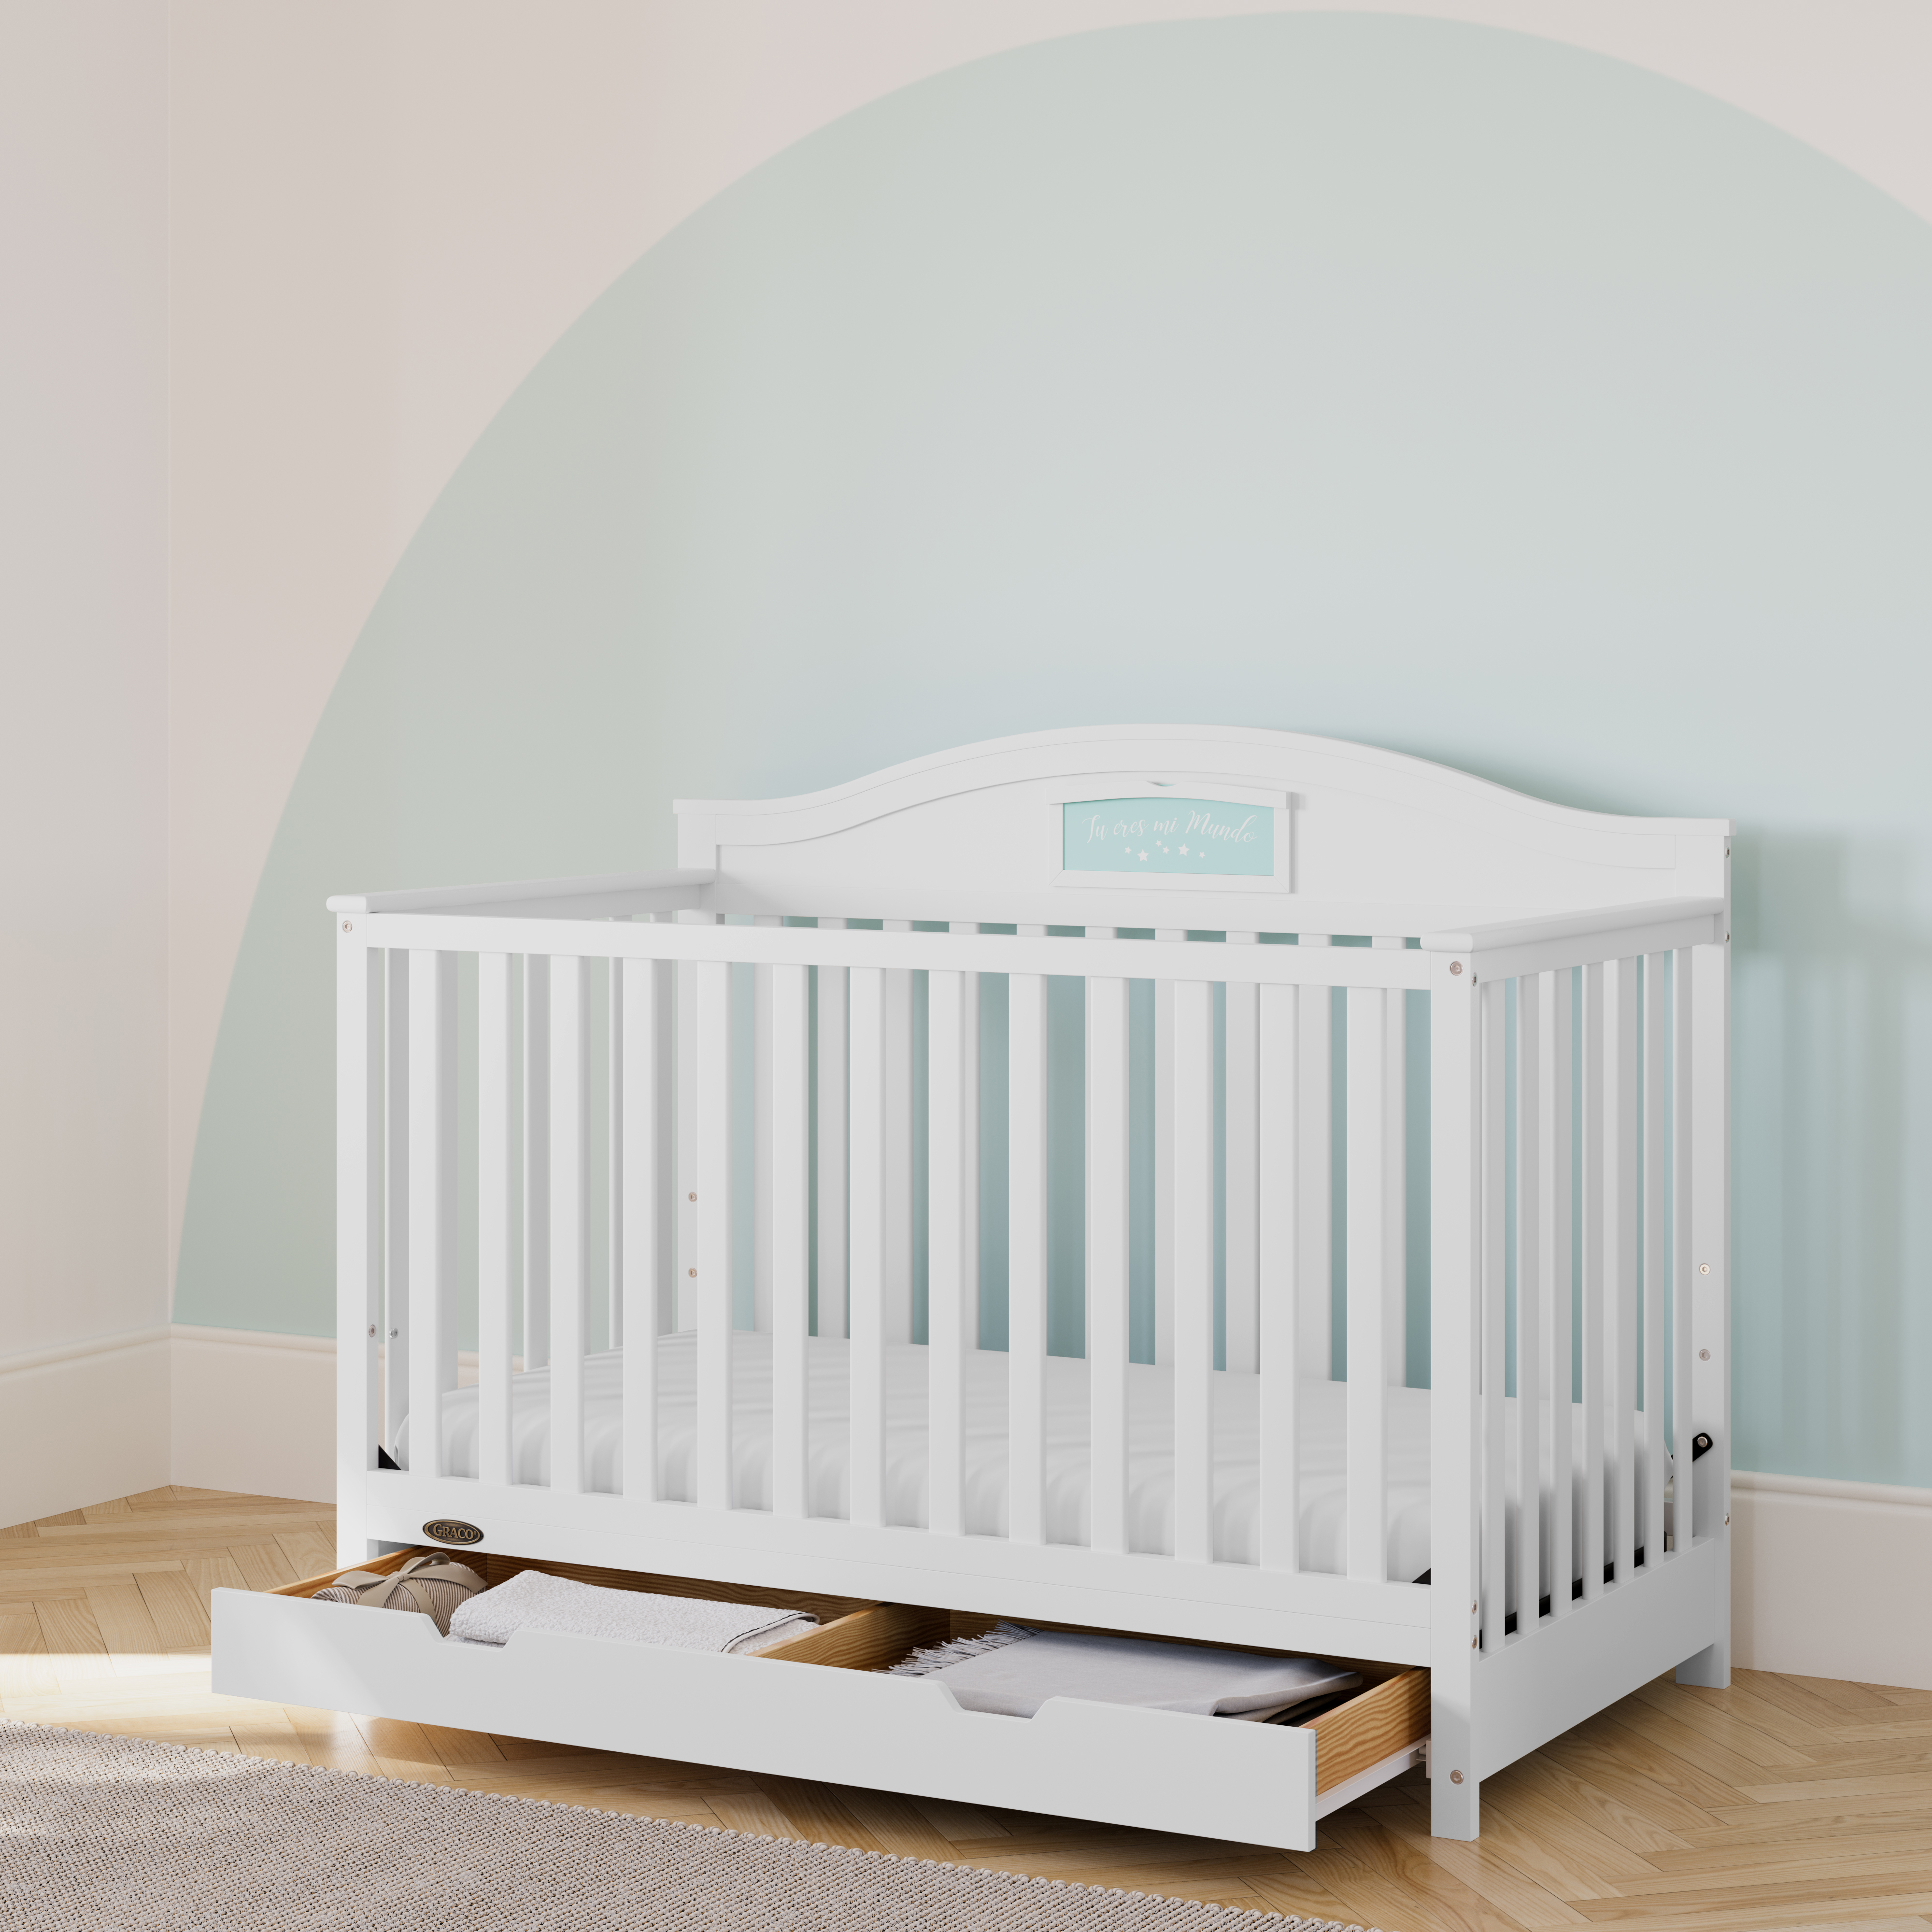 Graco Story 5-in-1 Convertible Baby Crib with Drawer, White - image 3 of 18